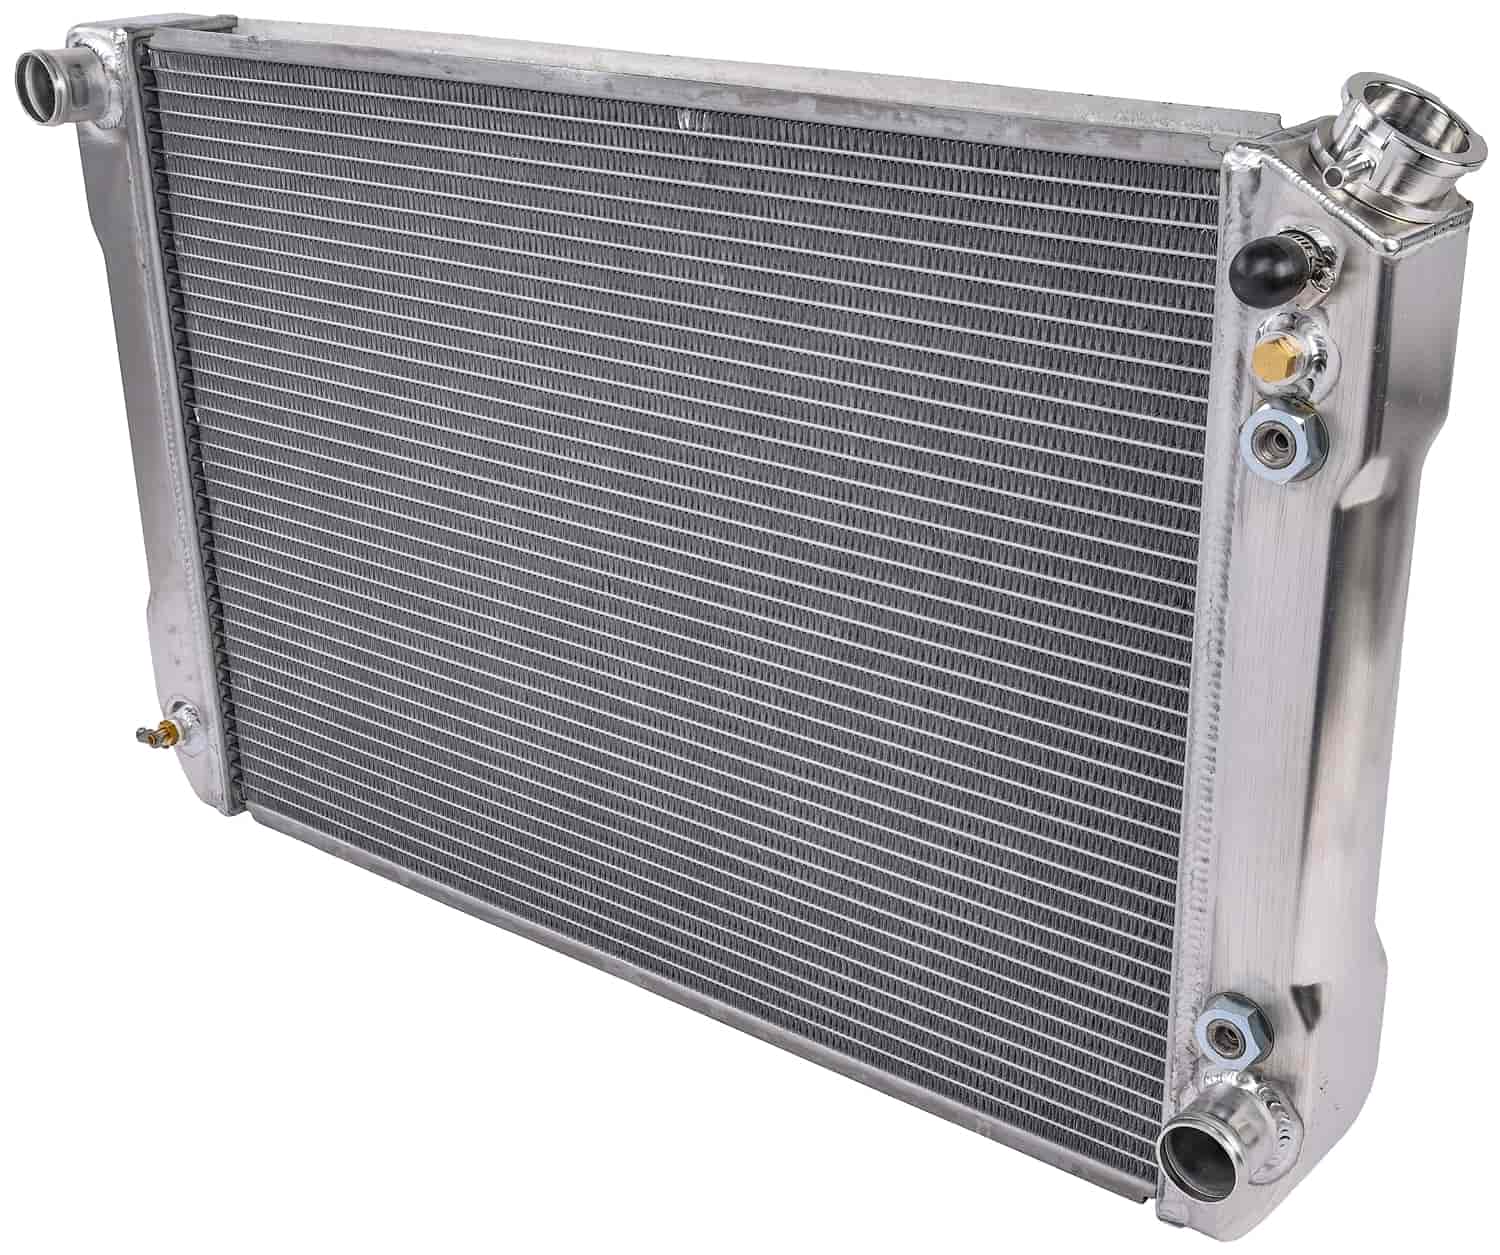 Ready Fit Aluminum Radiator for Small Block and Big Block Chevy Automatic Transmission